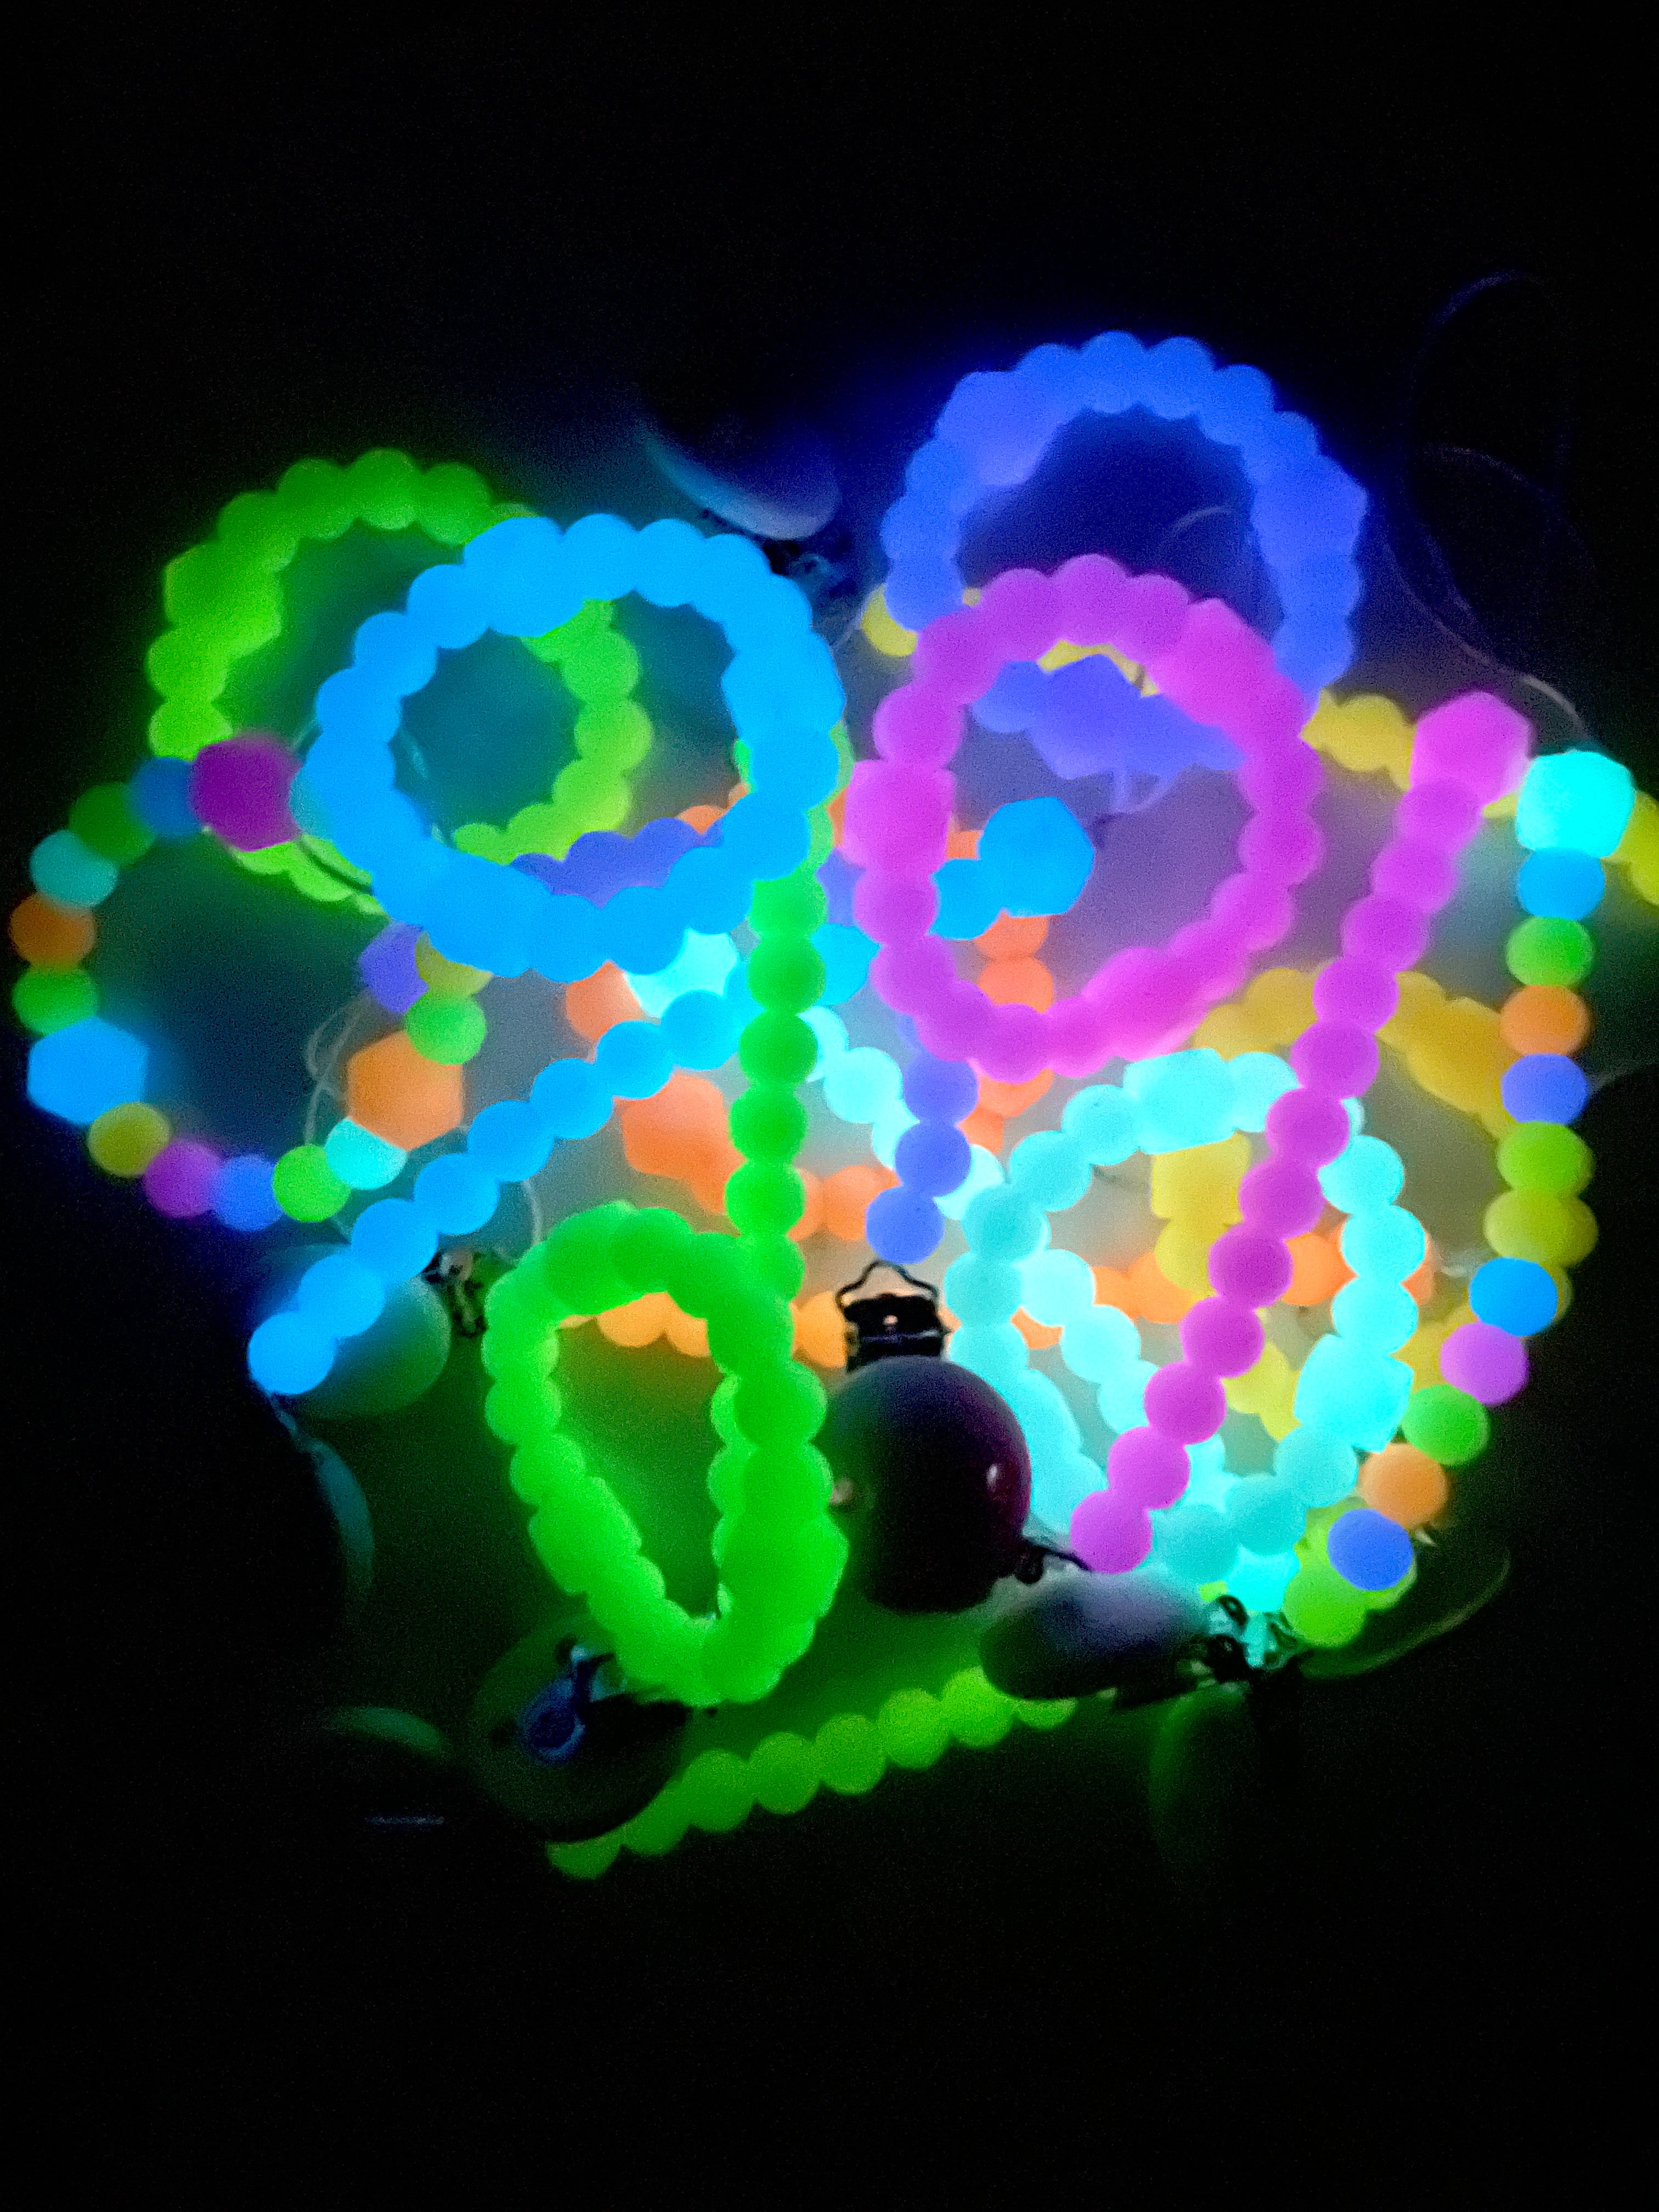 Glow in the Dark Accessories - Beads and Bubs Australia – Beads & Bubs